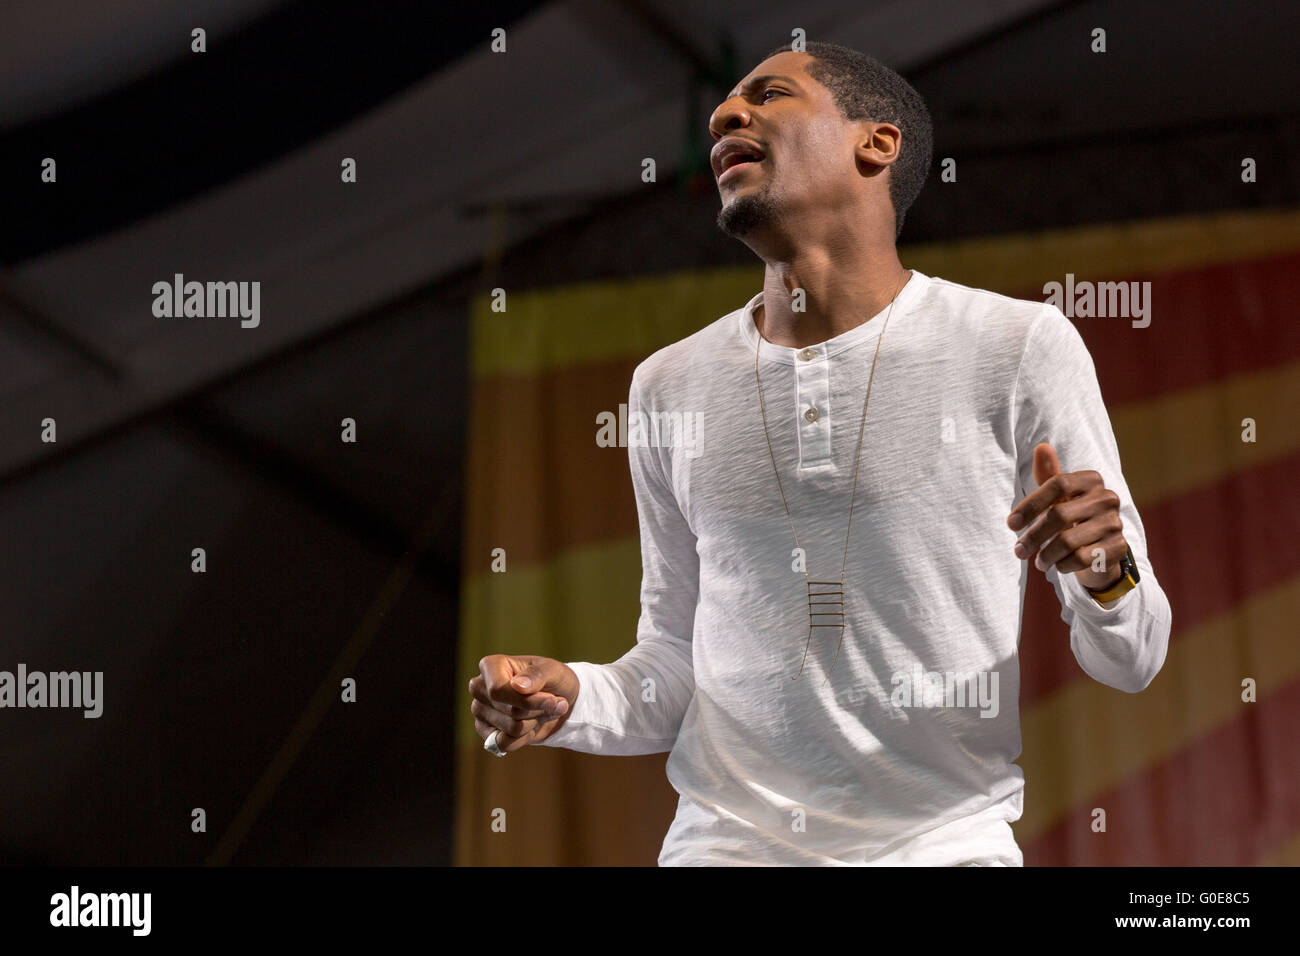 New Orleans, Louisiana, USA. 30th Apr, 2016. Musician JON BATISTE performs live with his band Stay Human during the New Orleans Jazz & Heritage Festival at Fair Grounds Race Course in New Orleans, Louisiana Credit:  Daniel DeSlover/ZUMA Wire/Alamy Live News Stock Photo